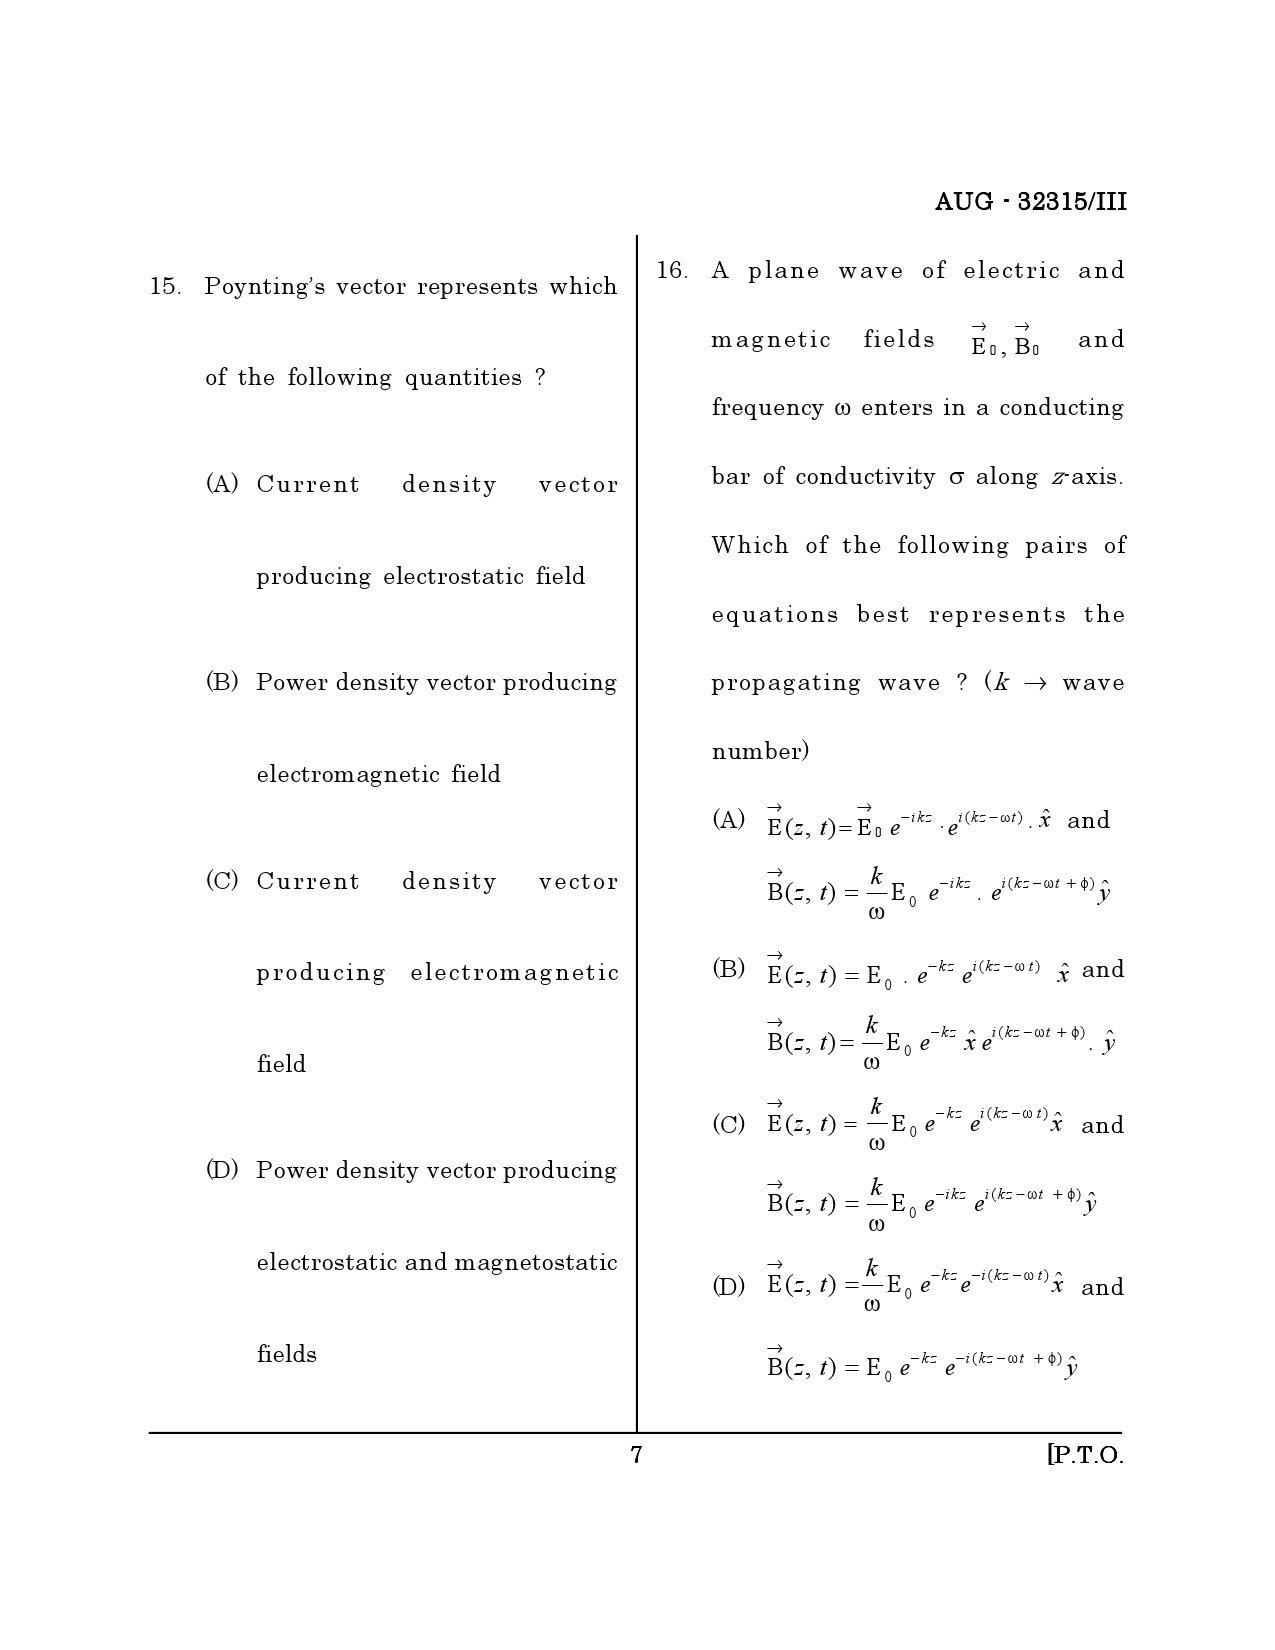 Maharashtra SET Physical Science Question Paper III August 2015 6